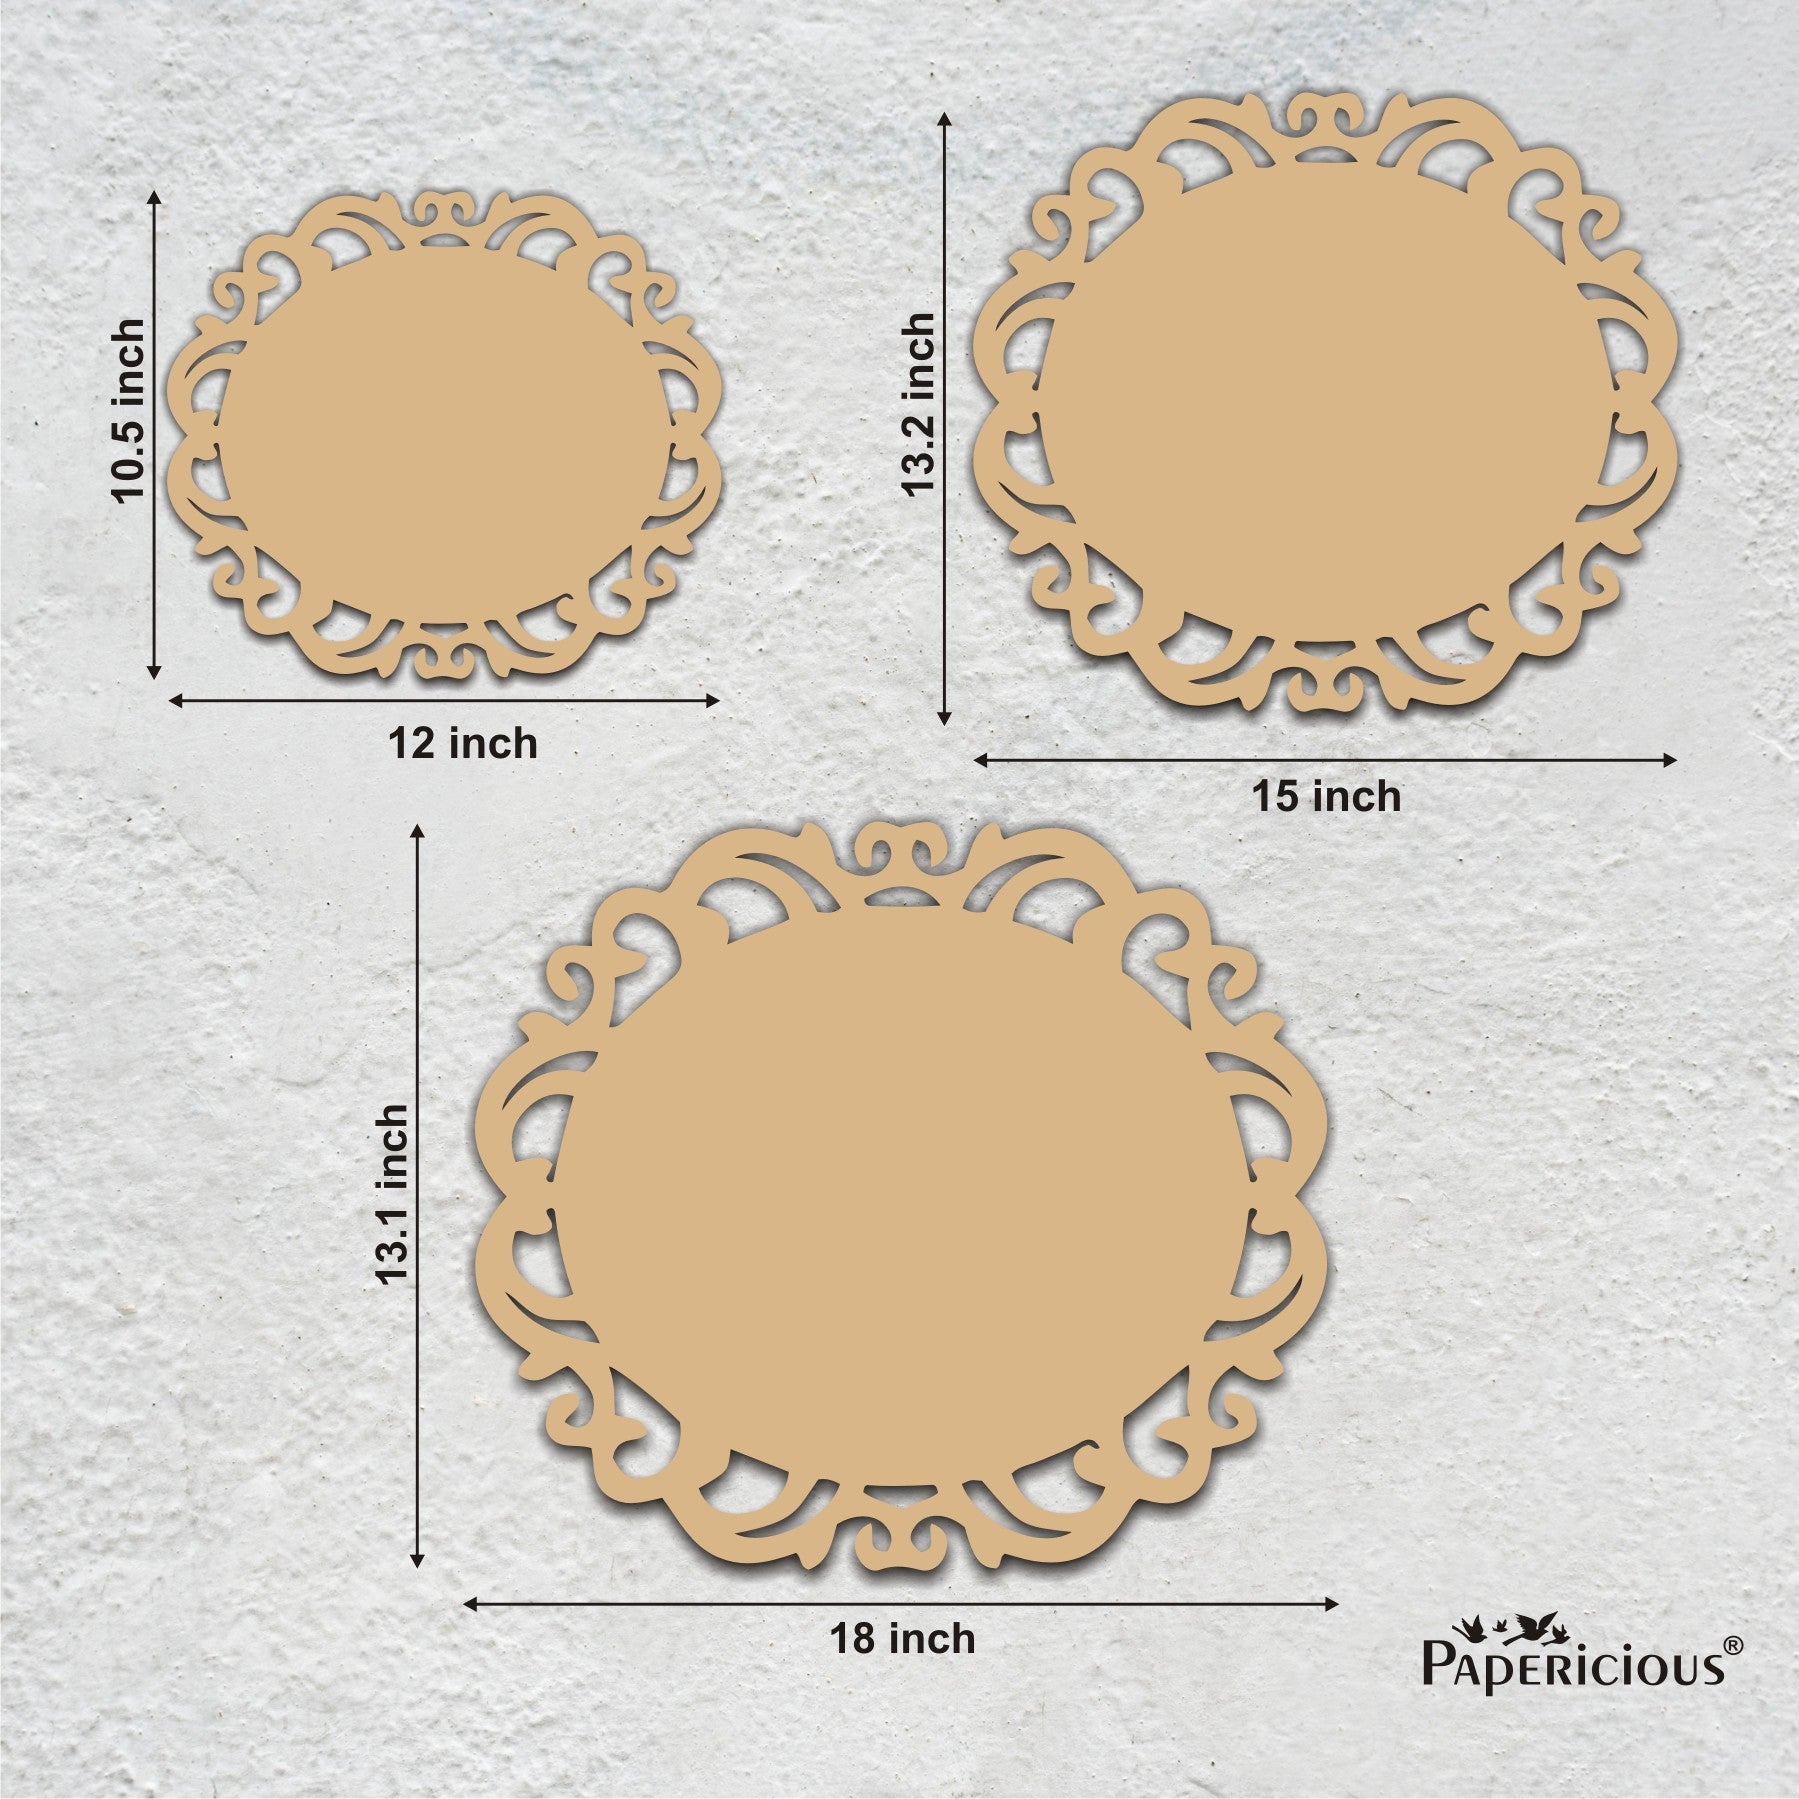 PAPERICIOUS 4.2mm thick MDF Name Plate Lace Circle